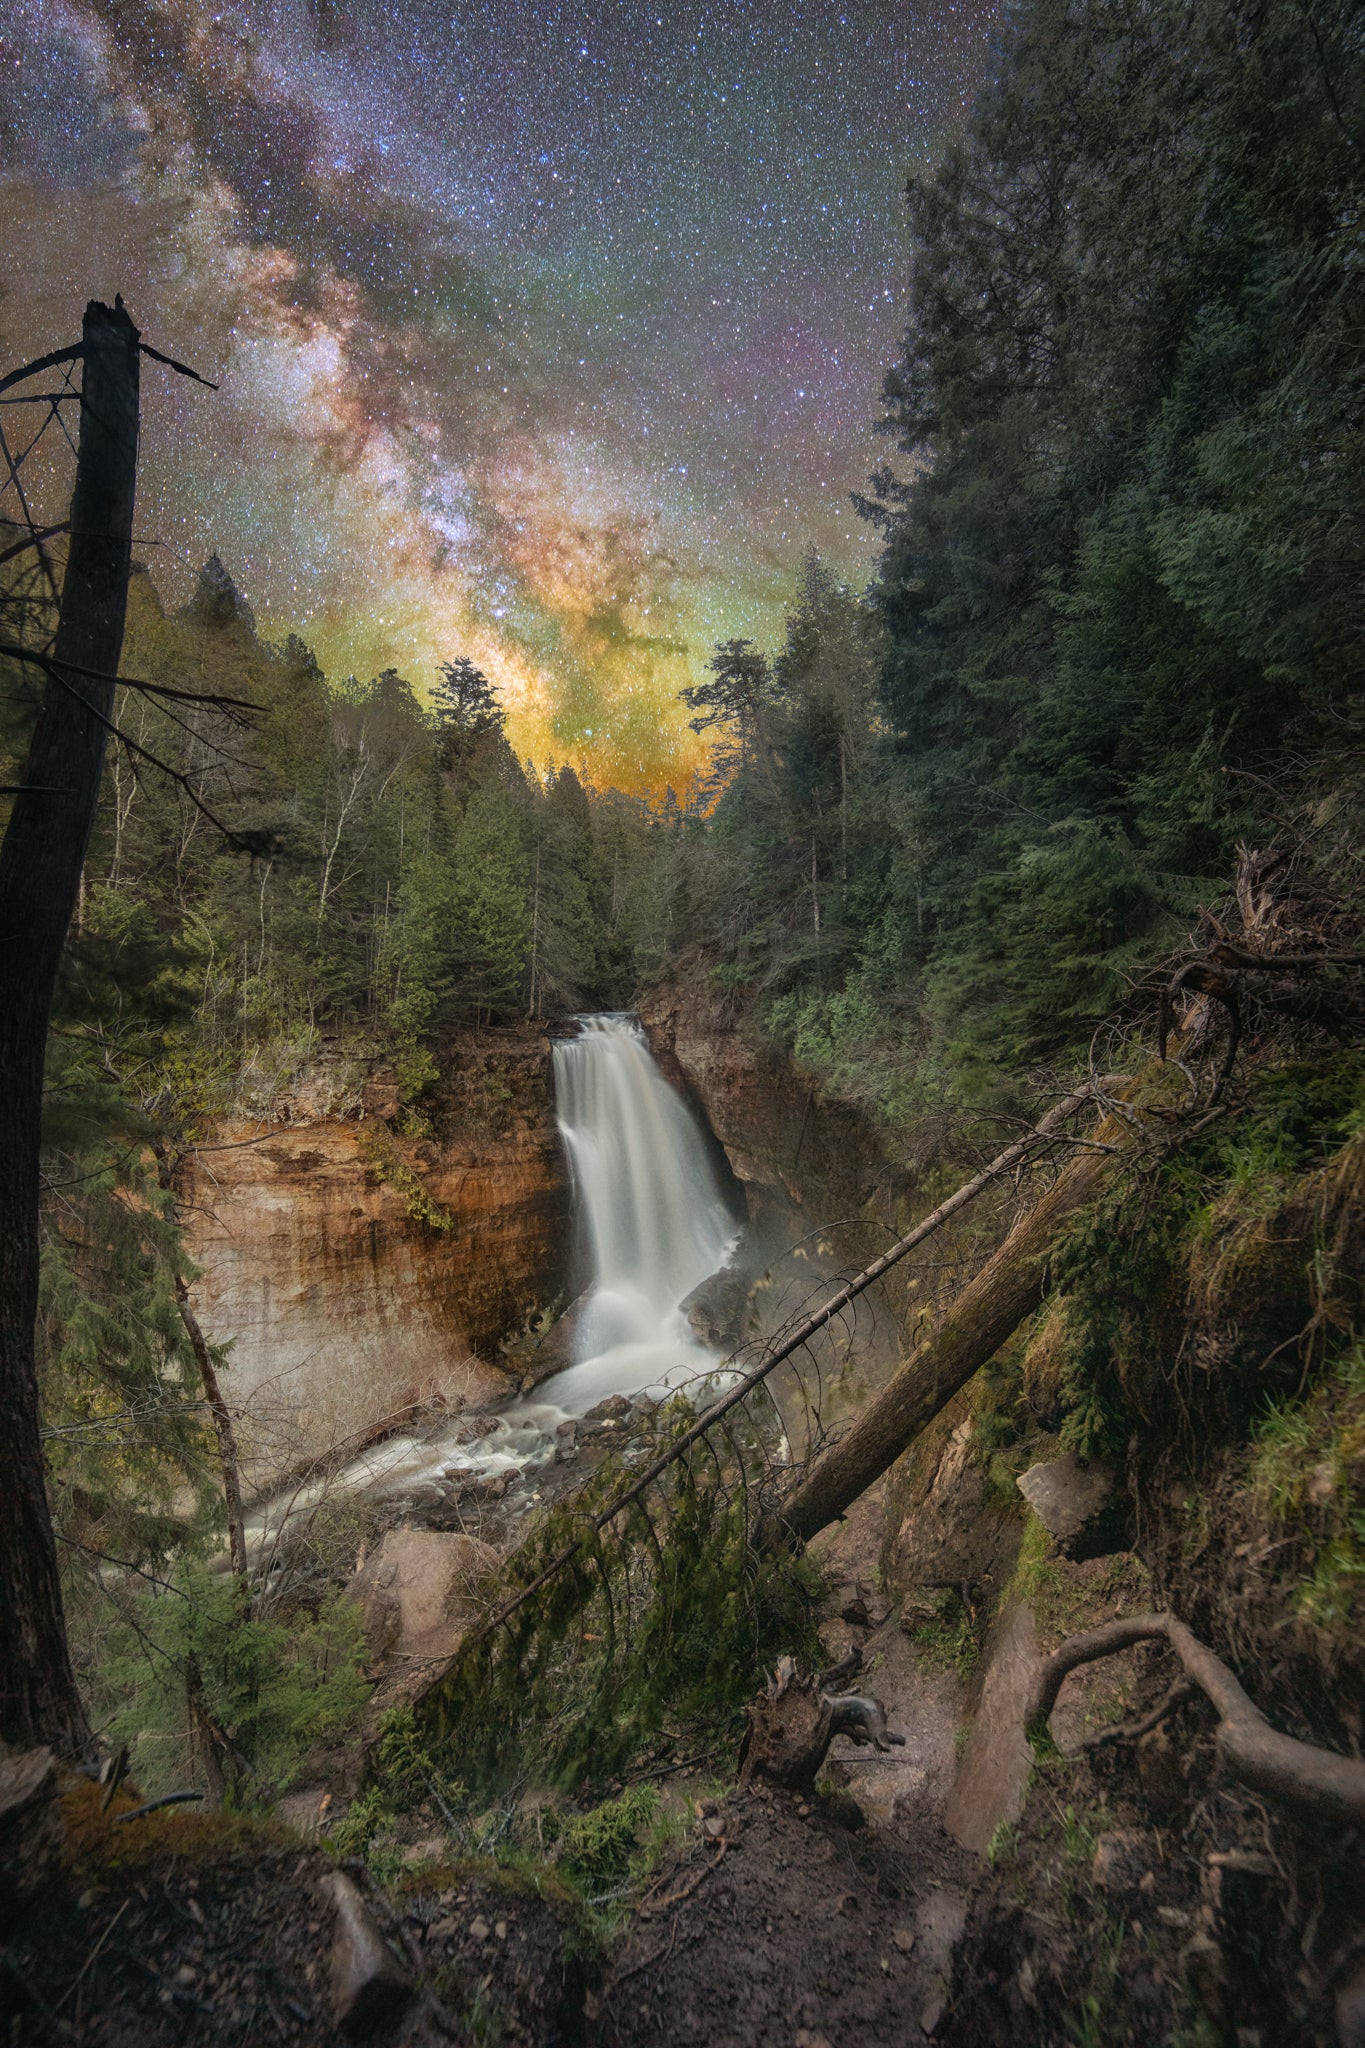 Miner's Falls Magic by Michigan Milkyway. Deep nightcap image of the Milky Way from Miner's Falls